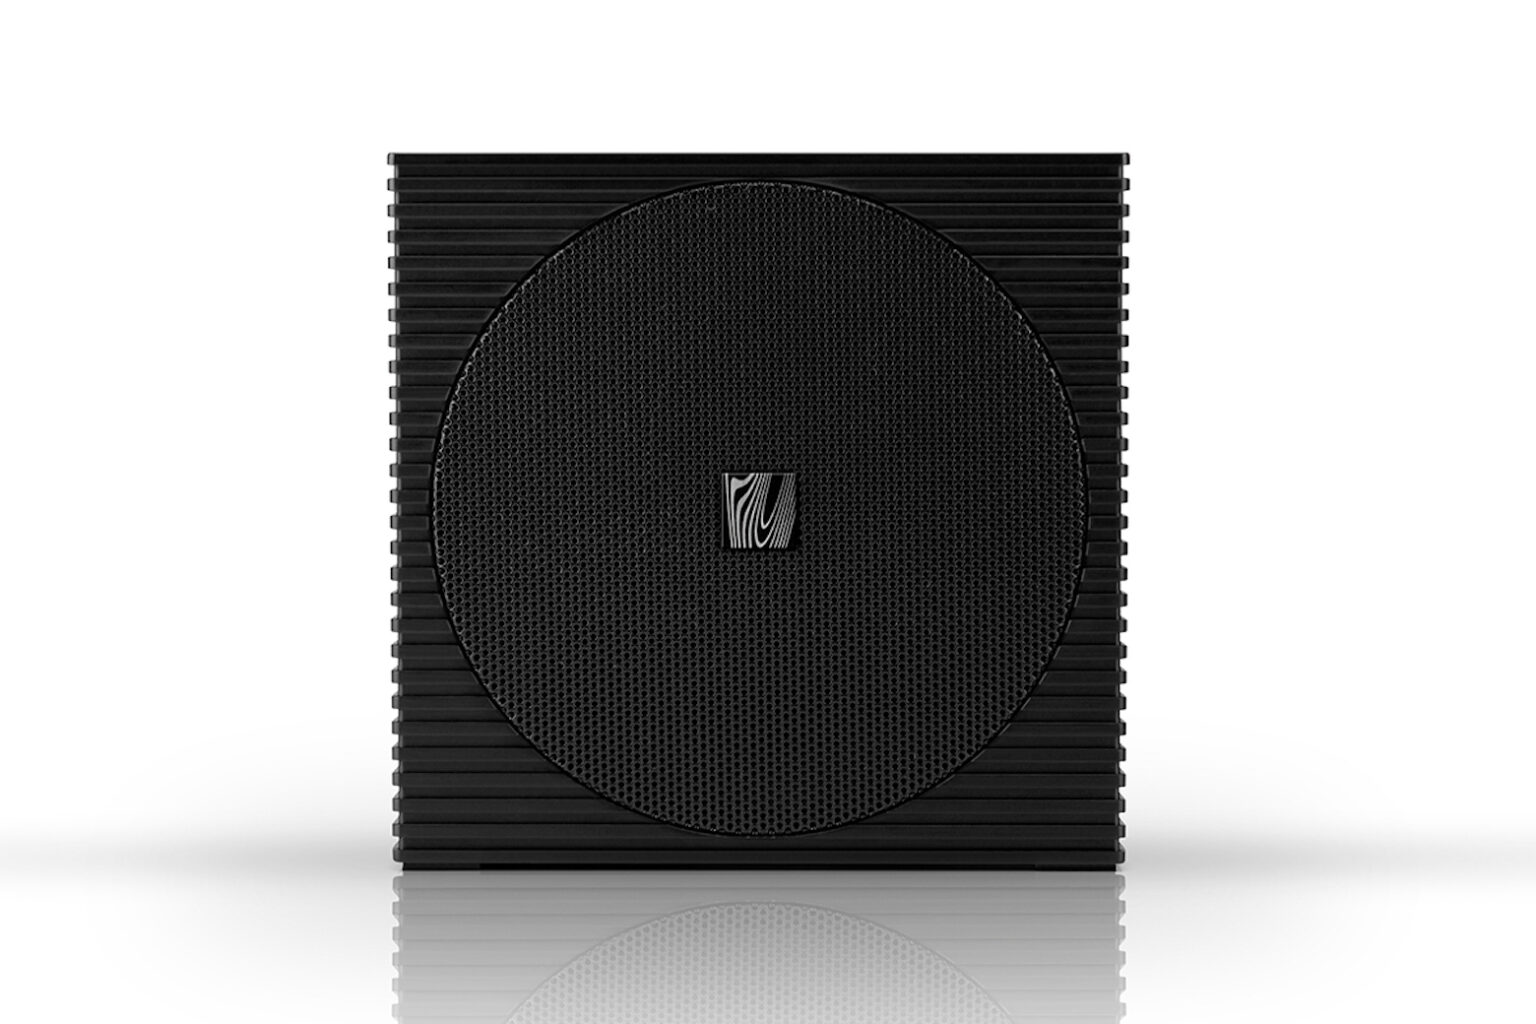 Listen to music for up to 7 hours with this awesome Bluetooth speaker, less than $30 right now.